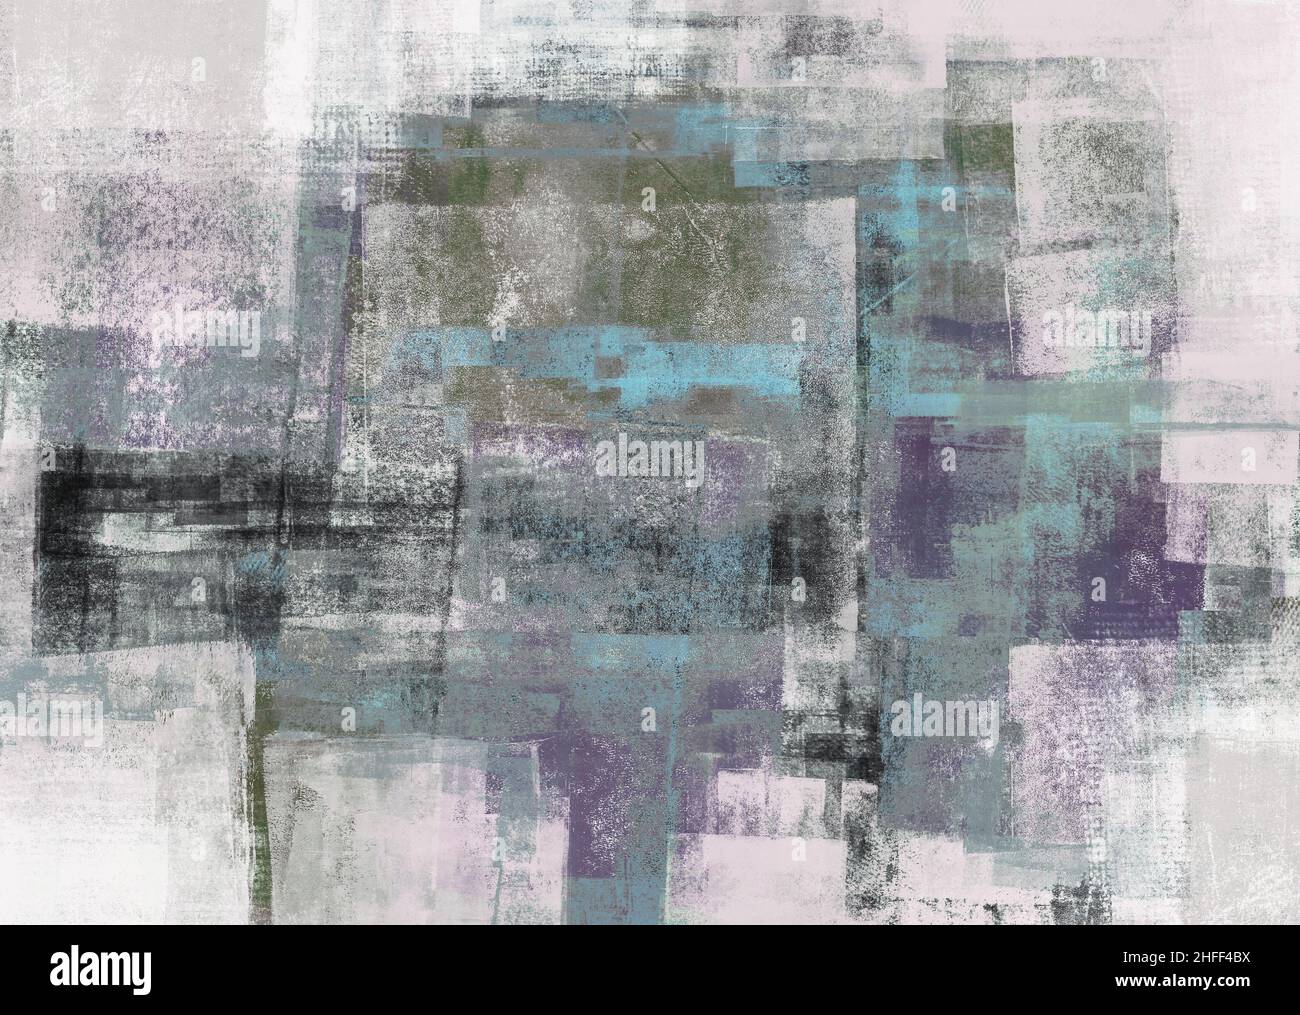 Handmade multilayered creative background made with various painting media Stock Photo